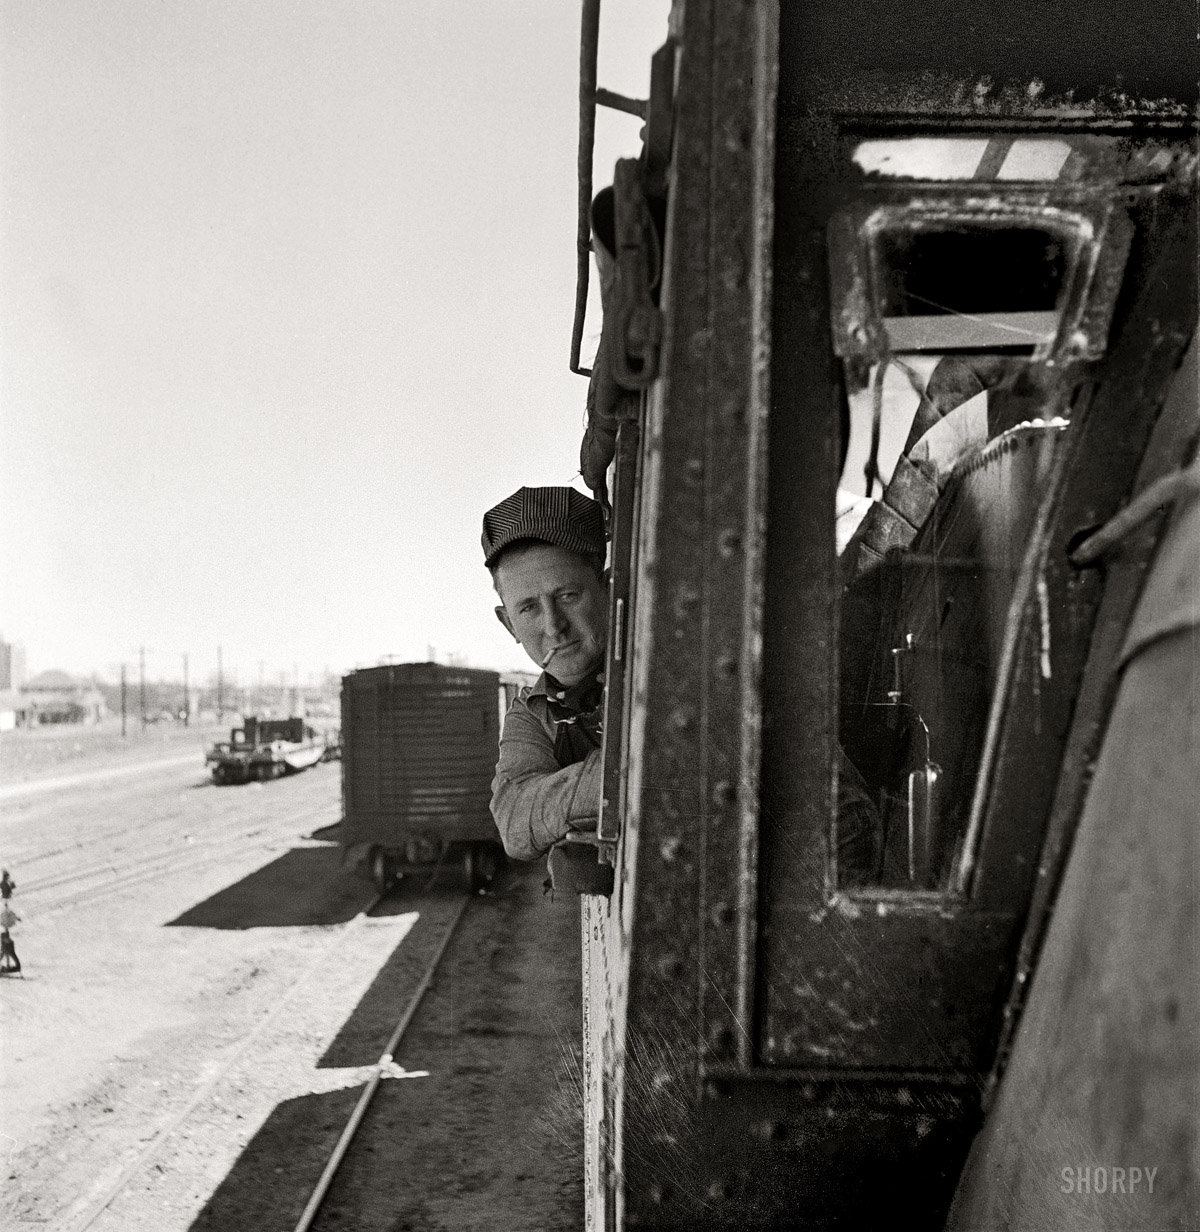 March 1943. "Clovis, New Mexico. D.L. Clark, engineer, ready to start his locomotive out of the Atchison, Topeka and Santa Fe Railroad yard." Medium-format negative by Jack Delano, Office of War Information. View full size.